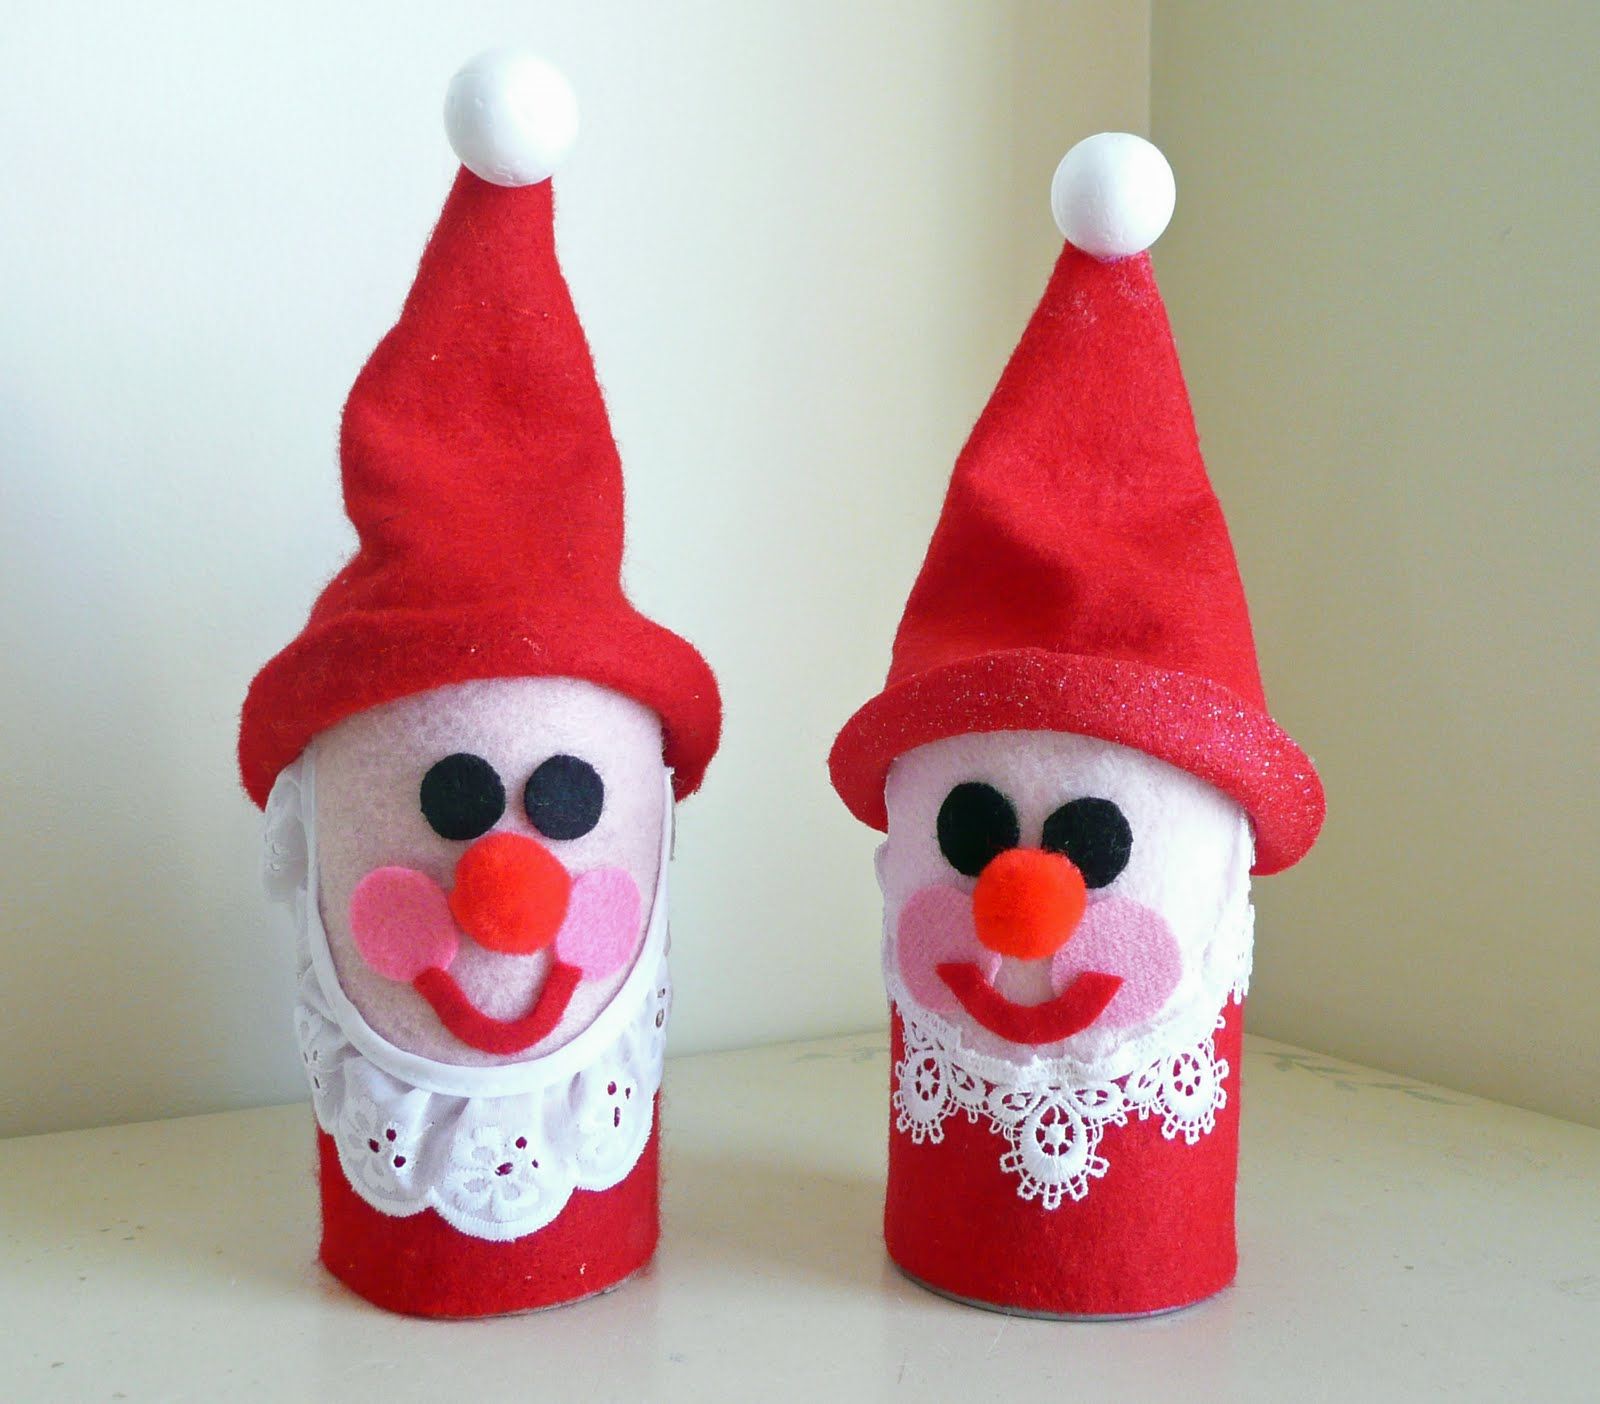 Preschool Crafts for Kids -   Christmas crafts for kids Ideas